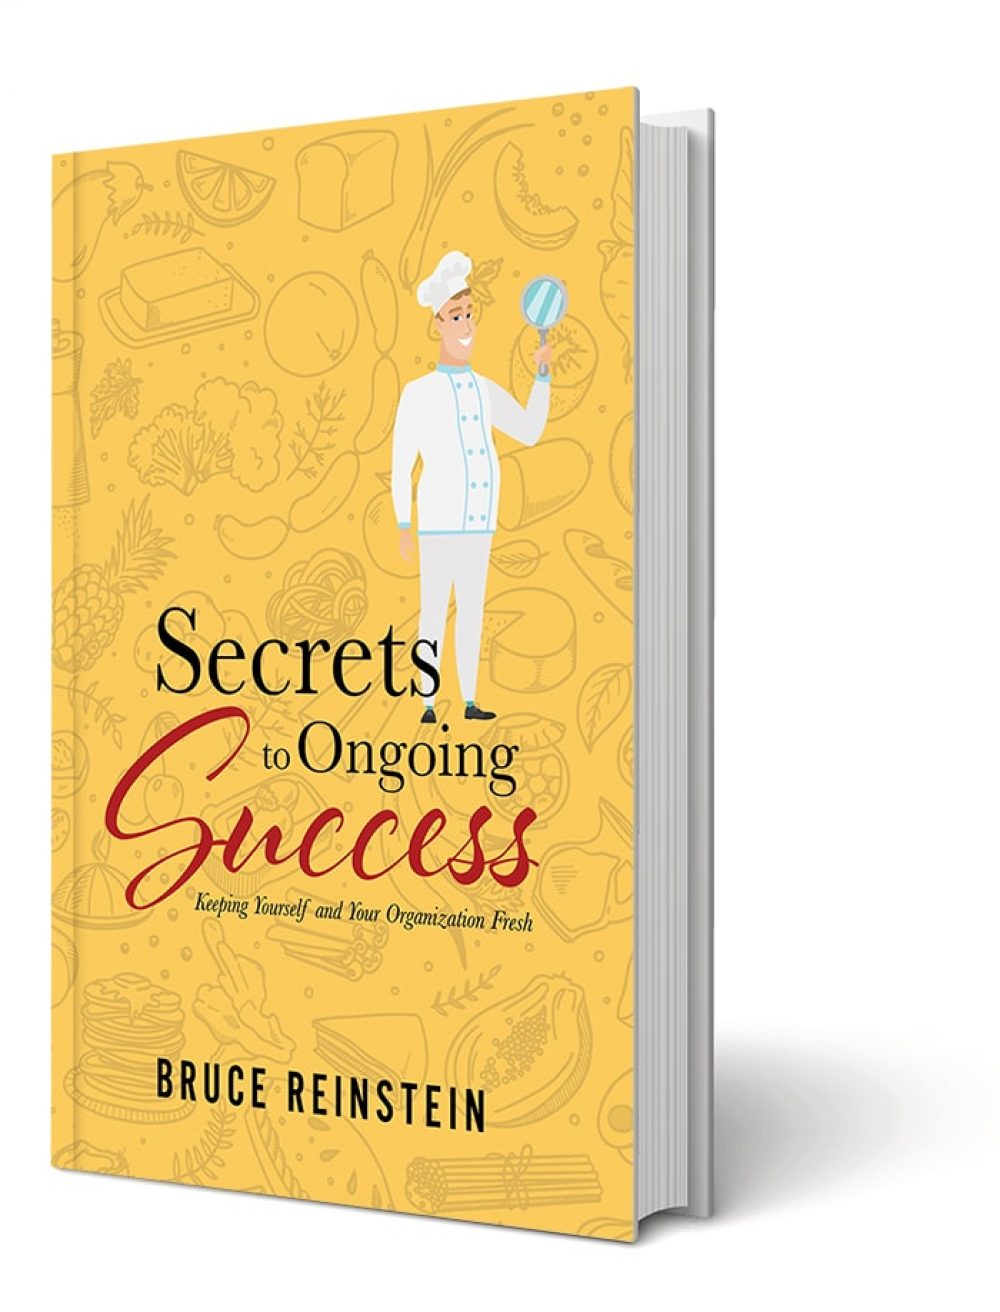 Secrets to Ongoing Success Book Cover, Bruce Reinstein